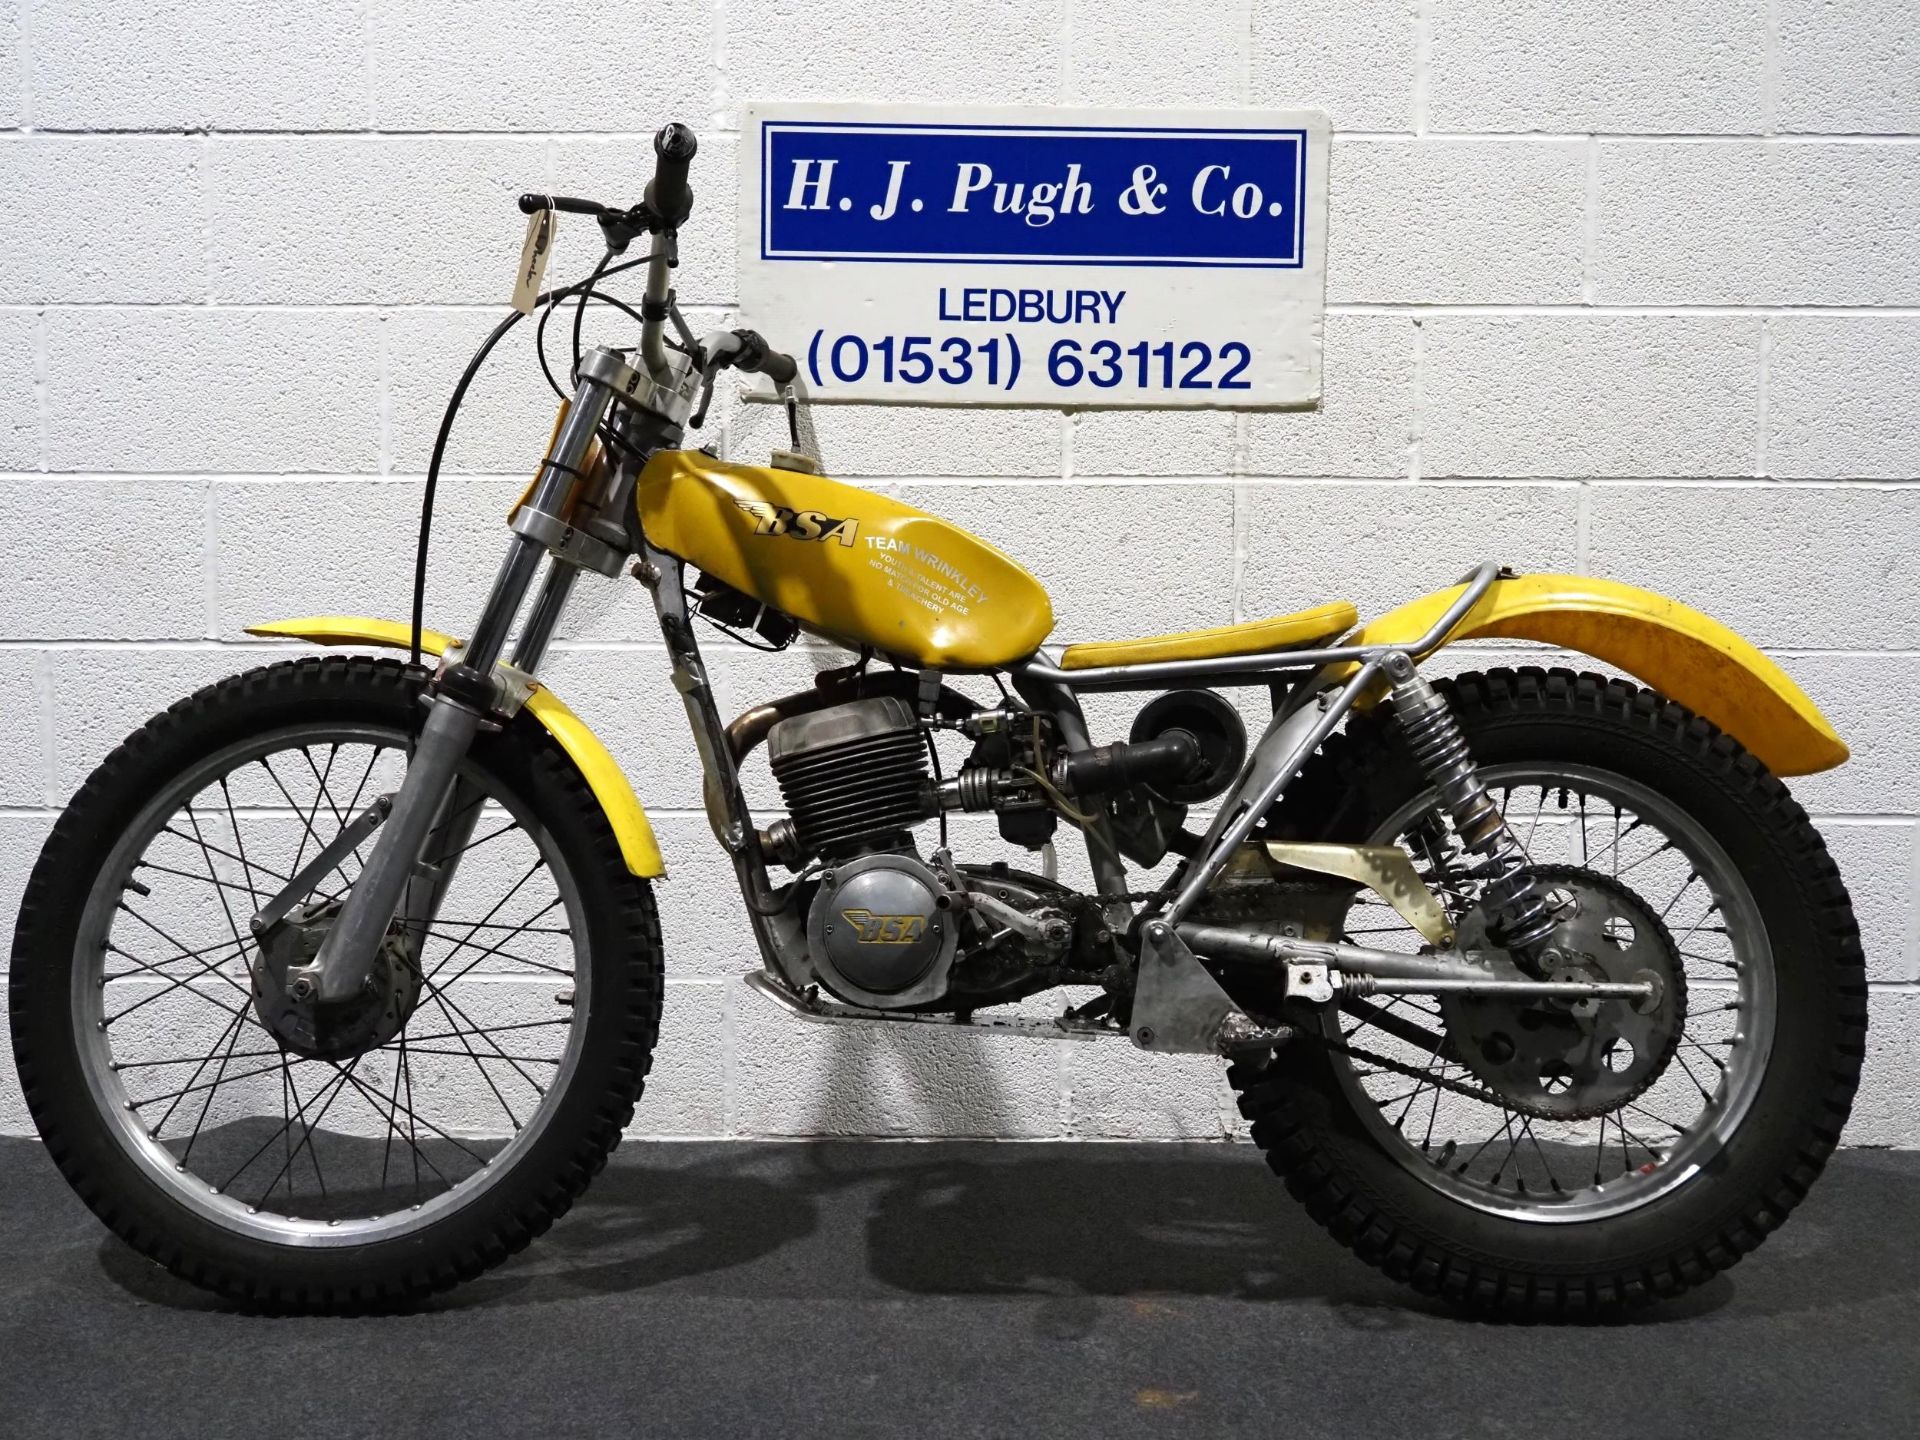 BSA Bantam trials motorcycle. 175cc Engine no. CEO7780B175 Property of a deceased estate. This - Image 5 of 5